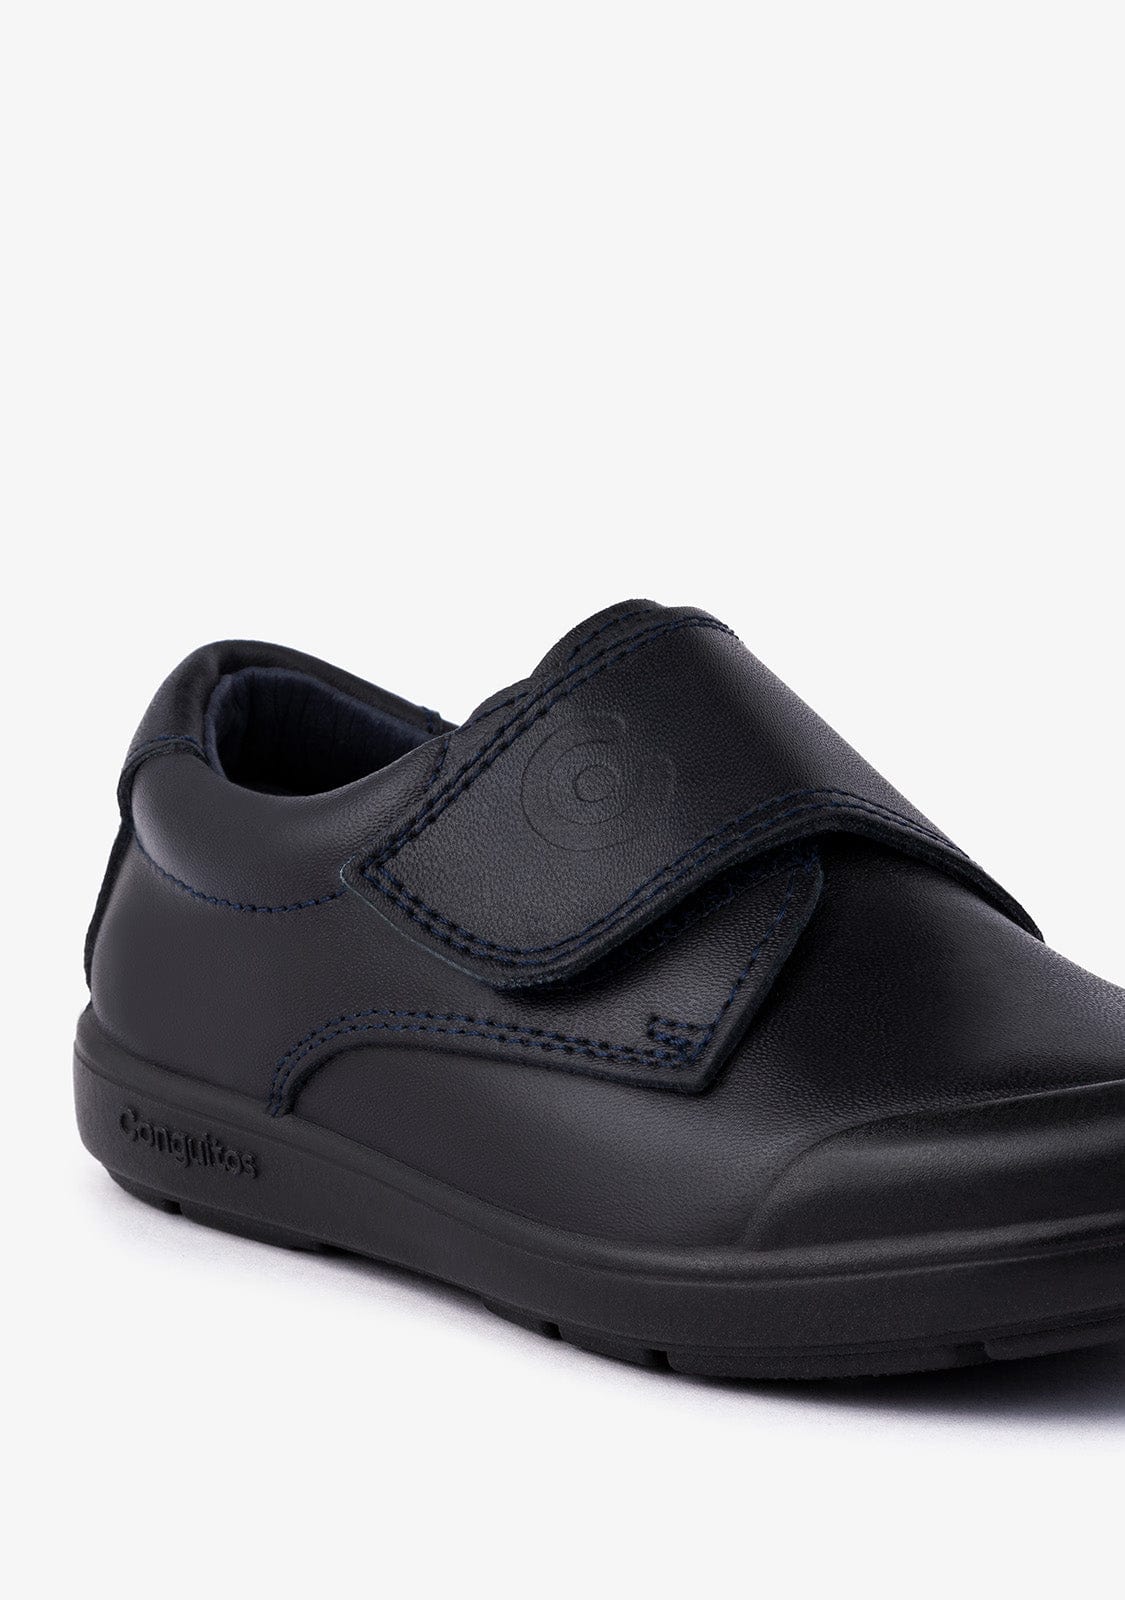 CONGUITOS Shoes Boy's Navy Washable Leather School Shoes